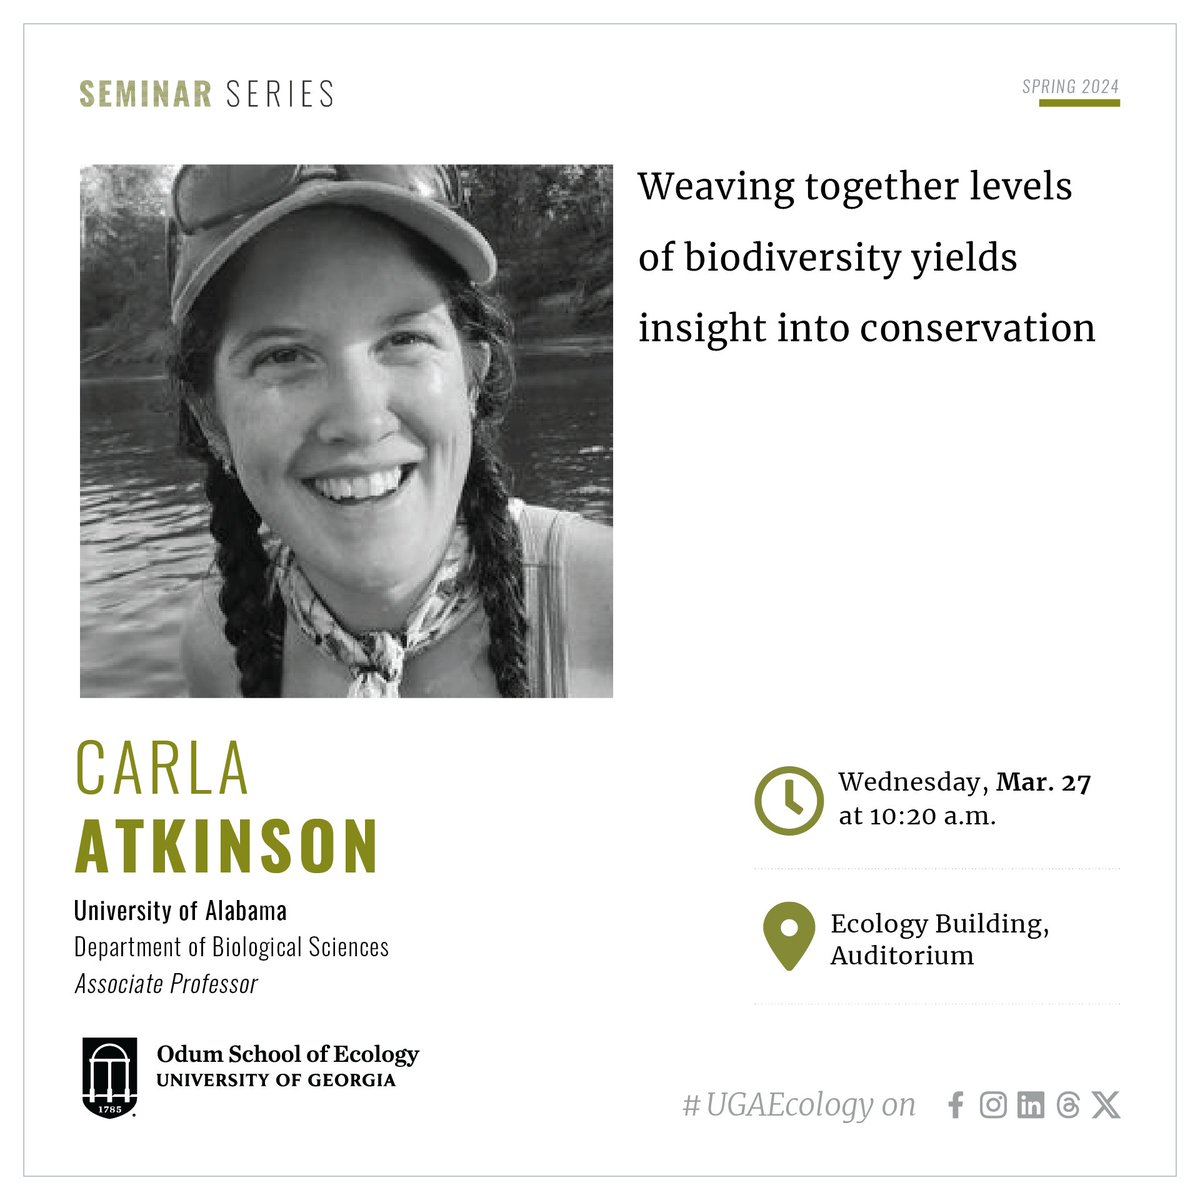 Mark your calendars for our next Ecology seminar: 'Weaving together levels of biodiversity yields insight into conservation' by @carlalatkinson, University of Alabama. Wednesday, March 27, 10:20 a.m., Ecology auditorium. Hope to see you there!